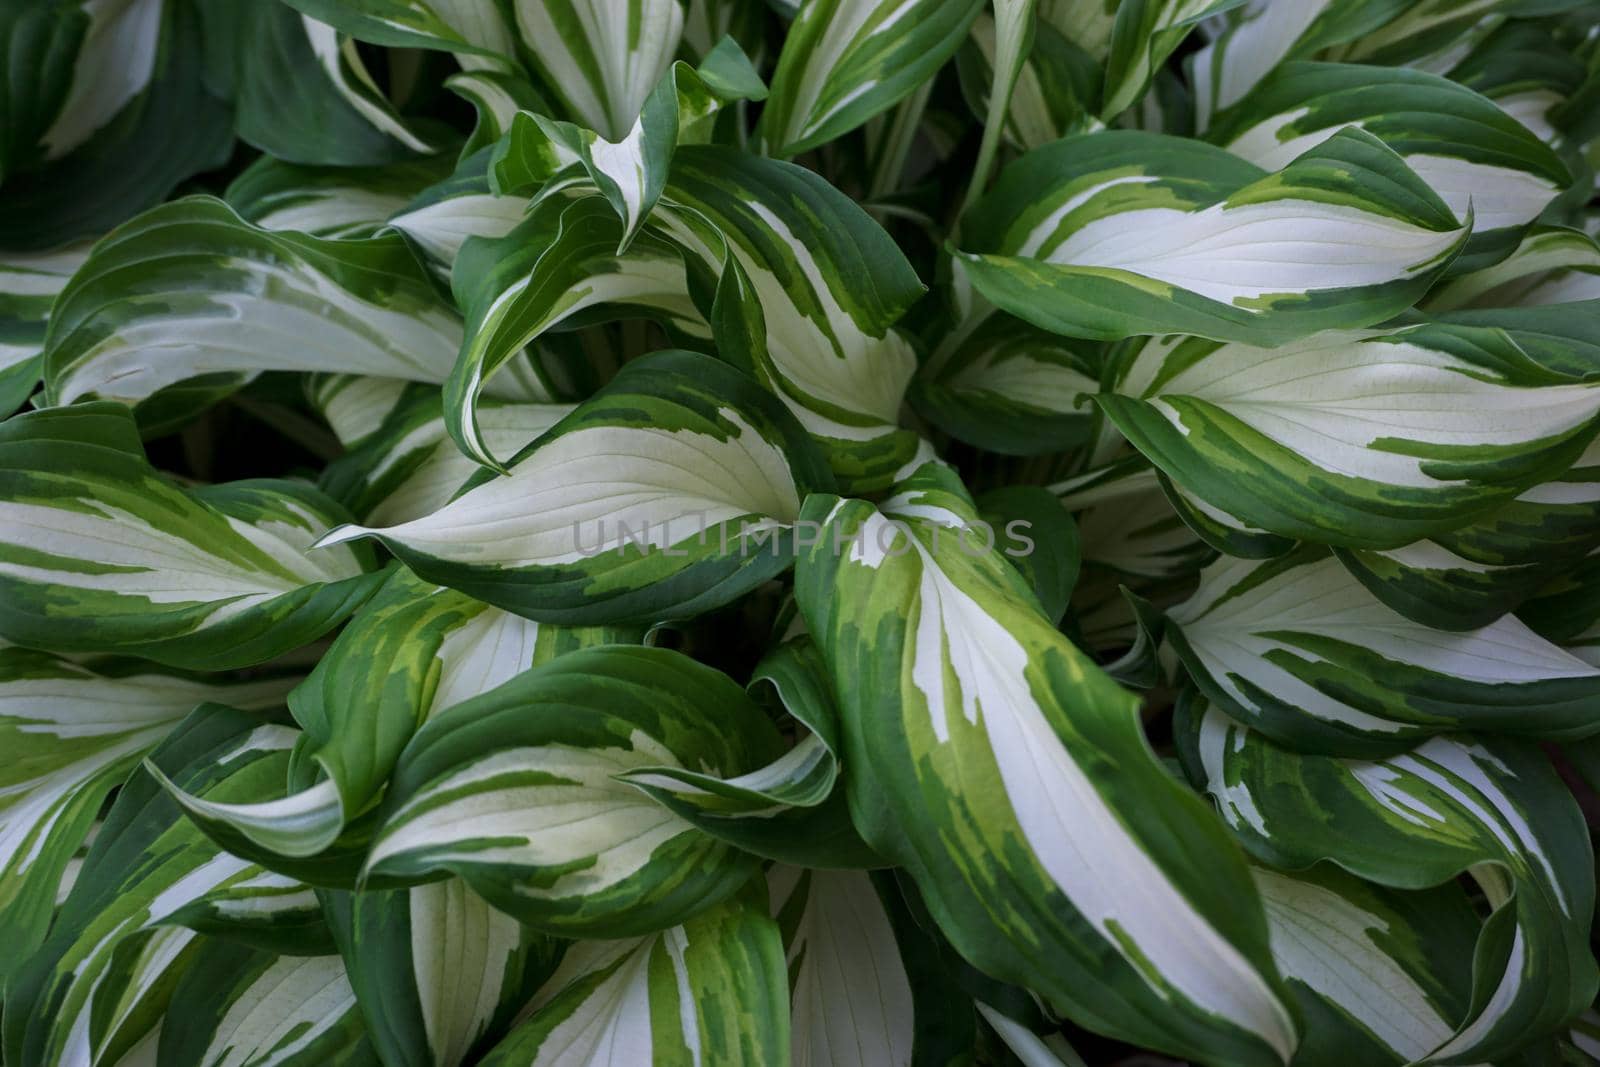 The white-green leaves of the hosts are taken in close-up. High quality photo